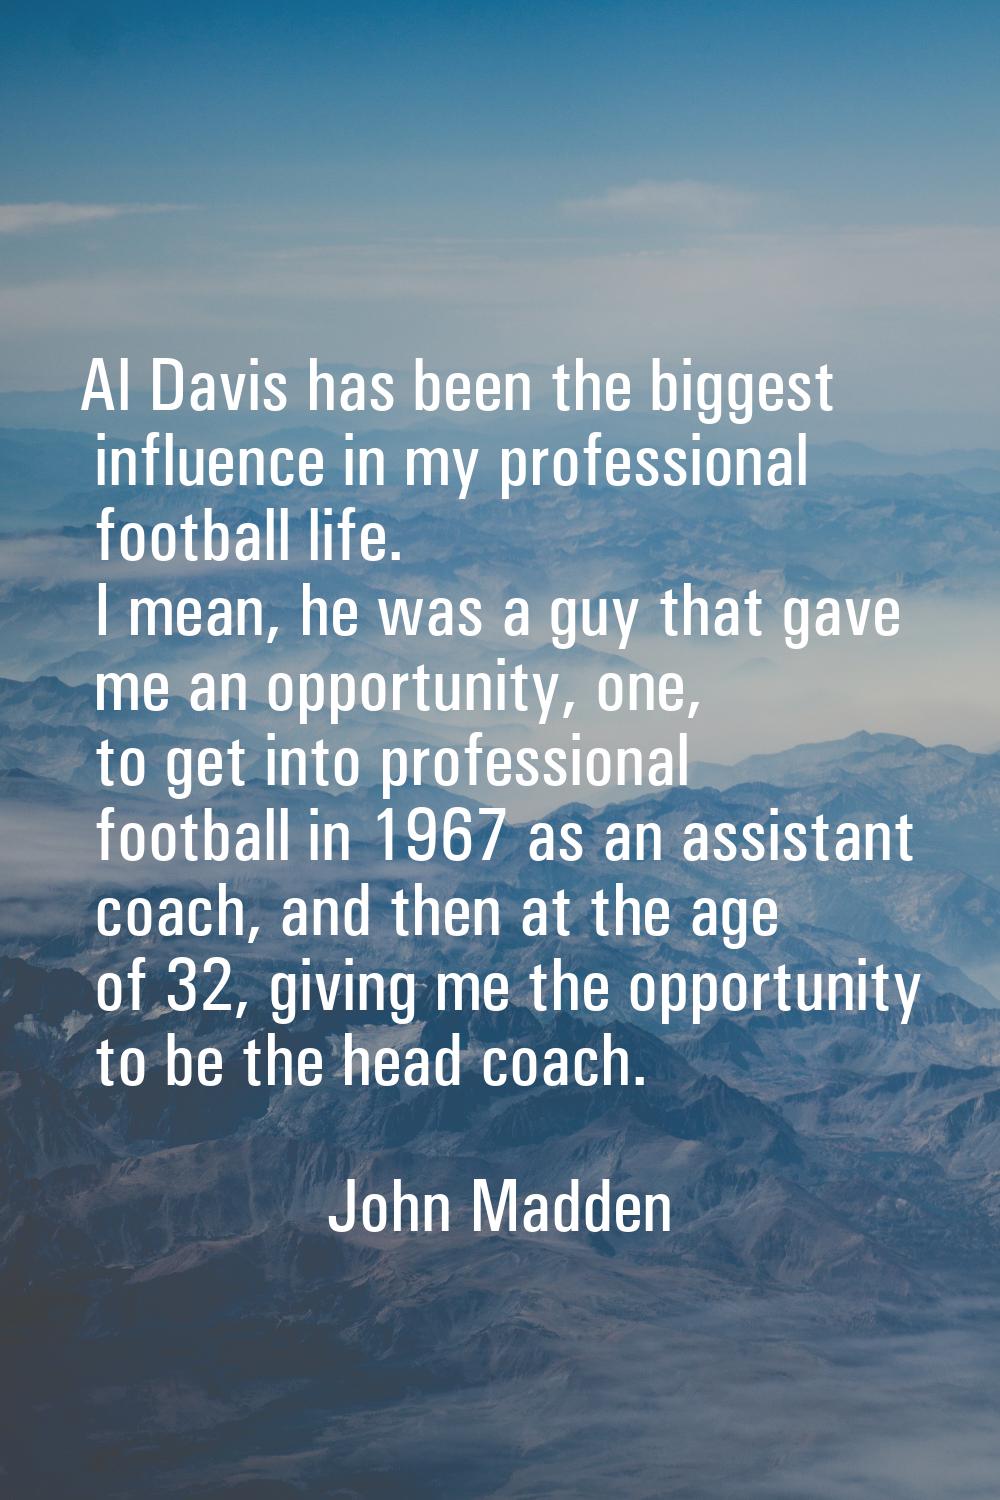 Al Davis has been the biggest influence in my professional football life. I mean, he was a guy that